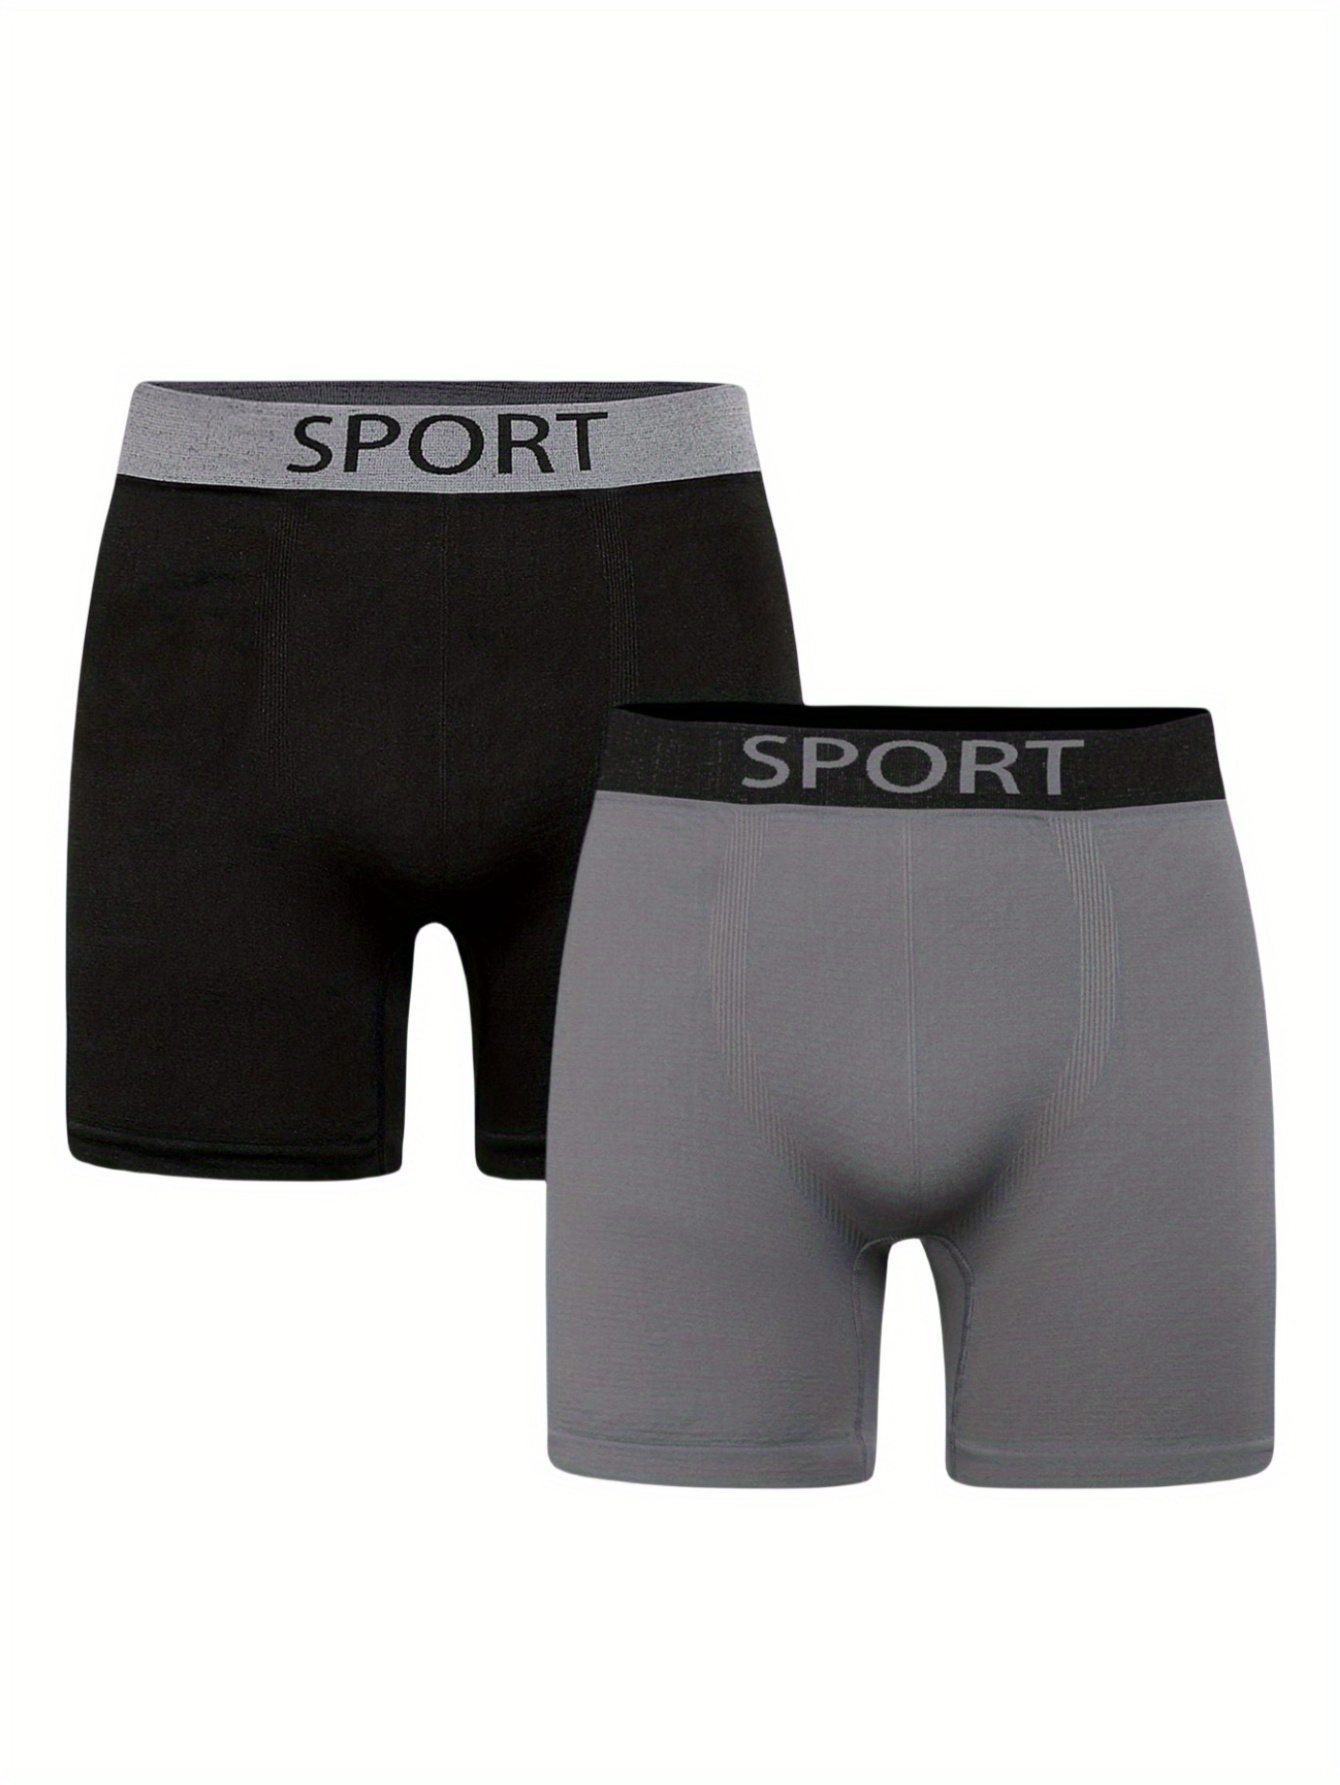 2pcs Seamless Boys Popular Boxers Letter Print Colorblock Briefs, Soft  Breathable Stretchy Sports Youth Boxer Pants